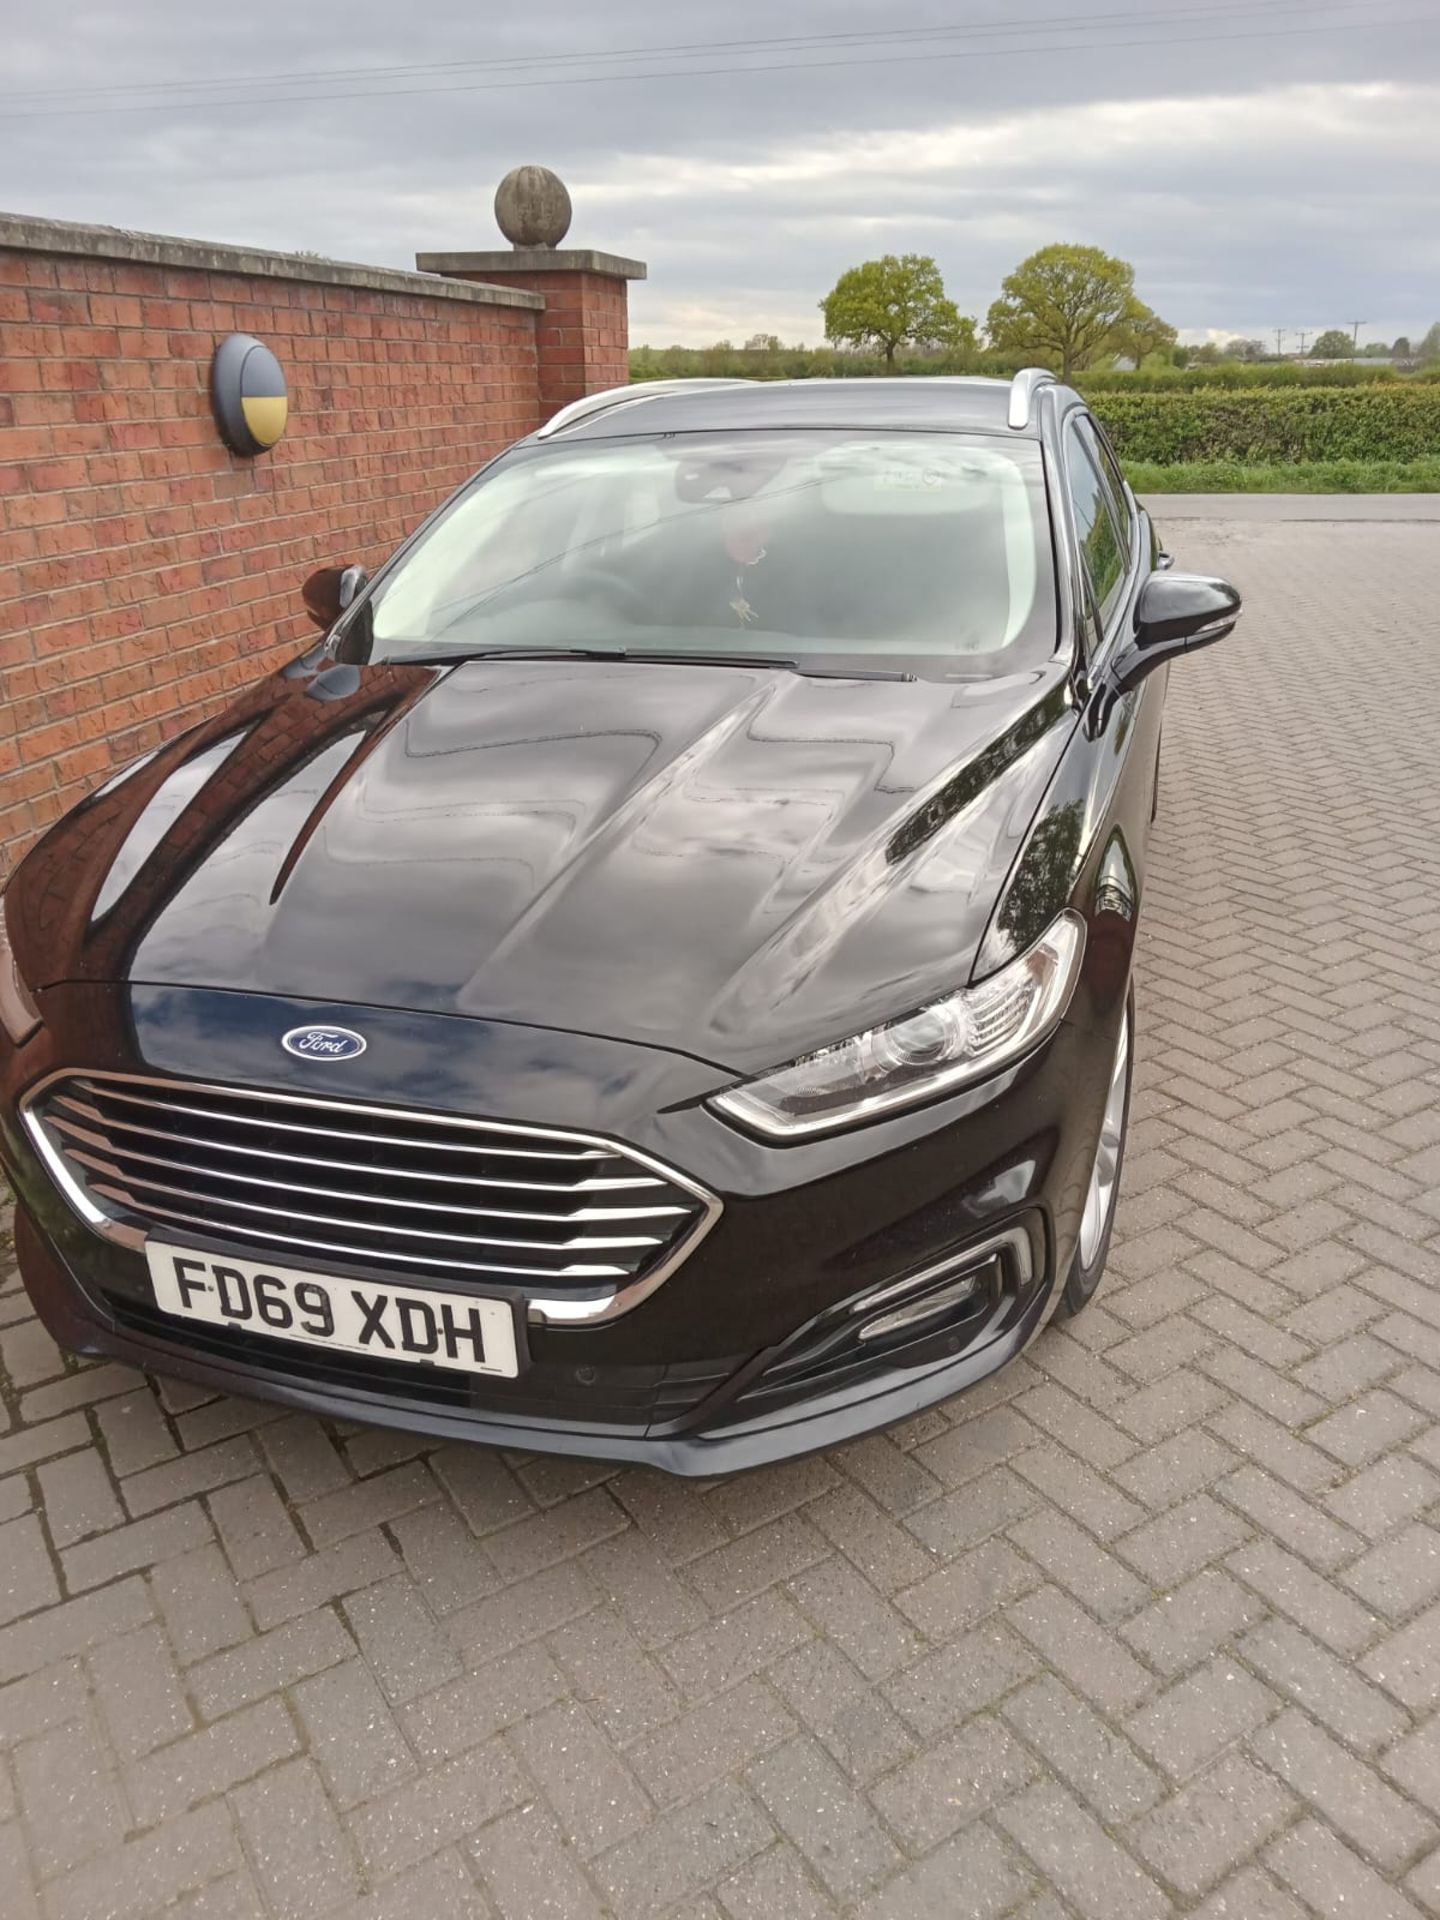 2019 FORD MONDEO - Image 4 of 11